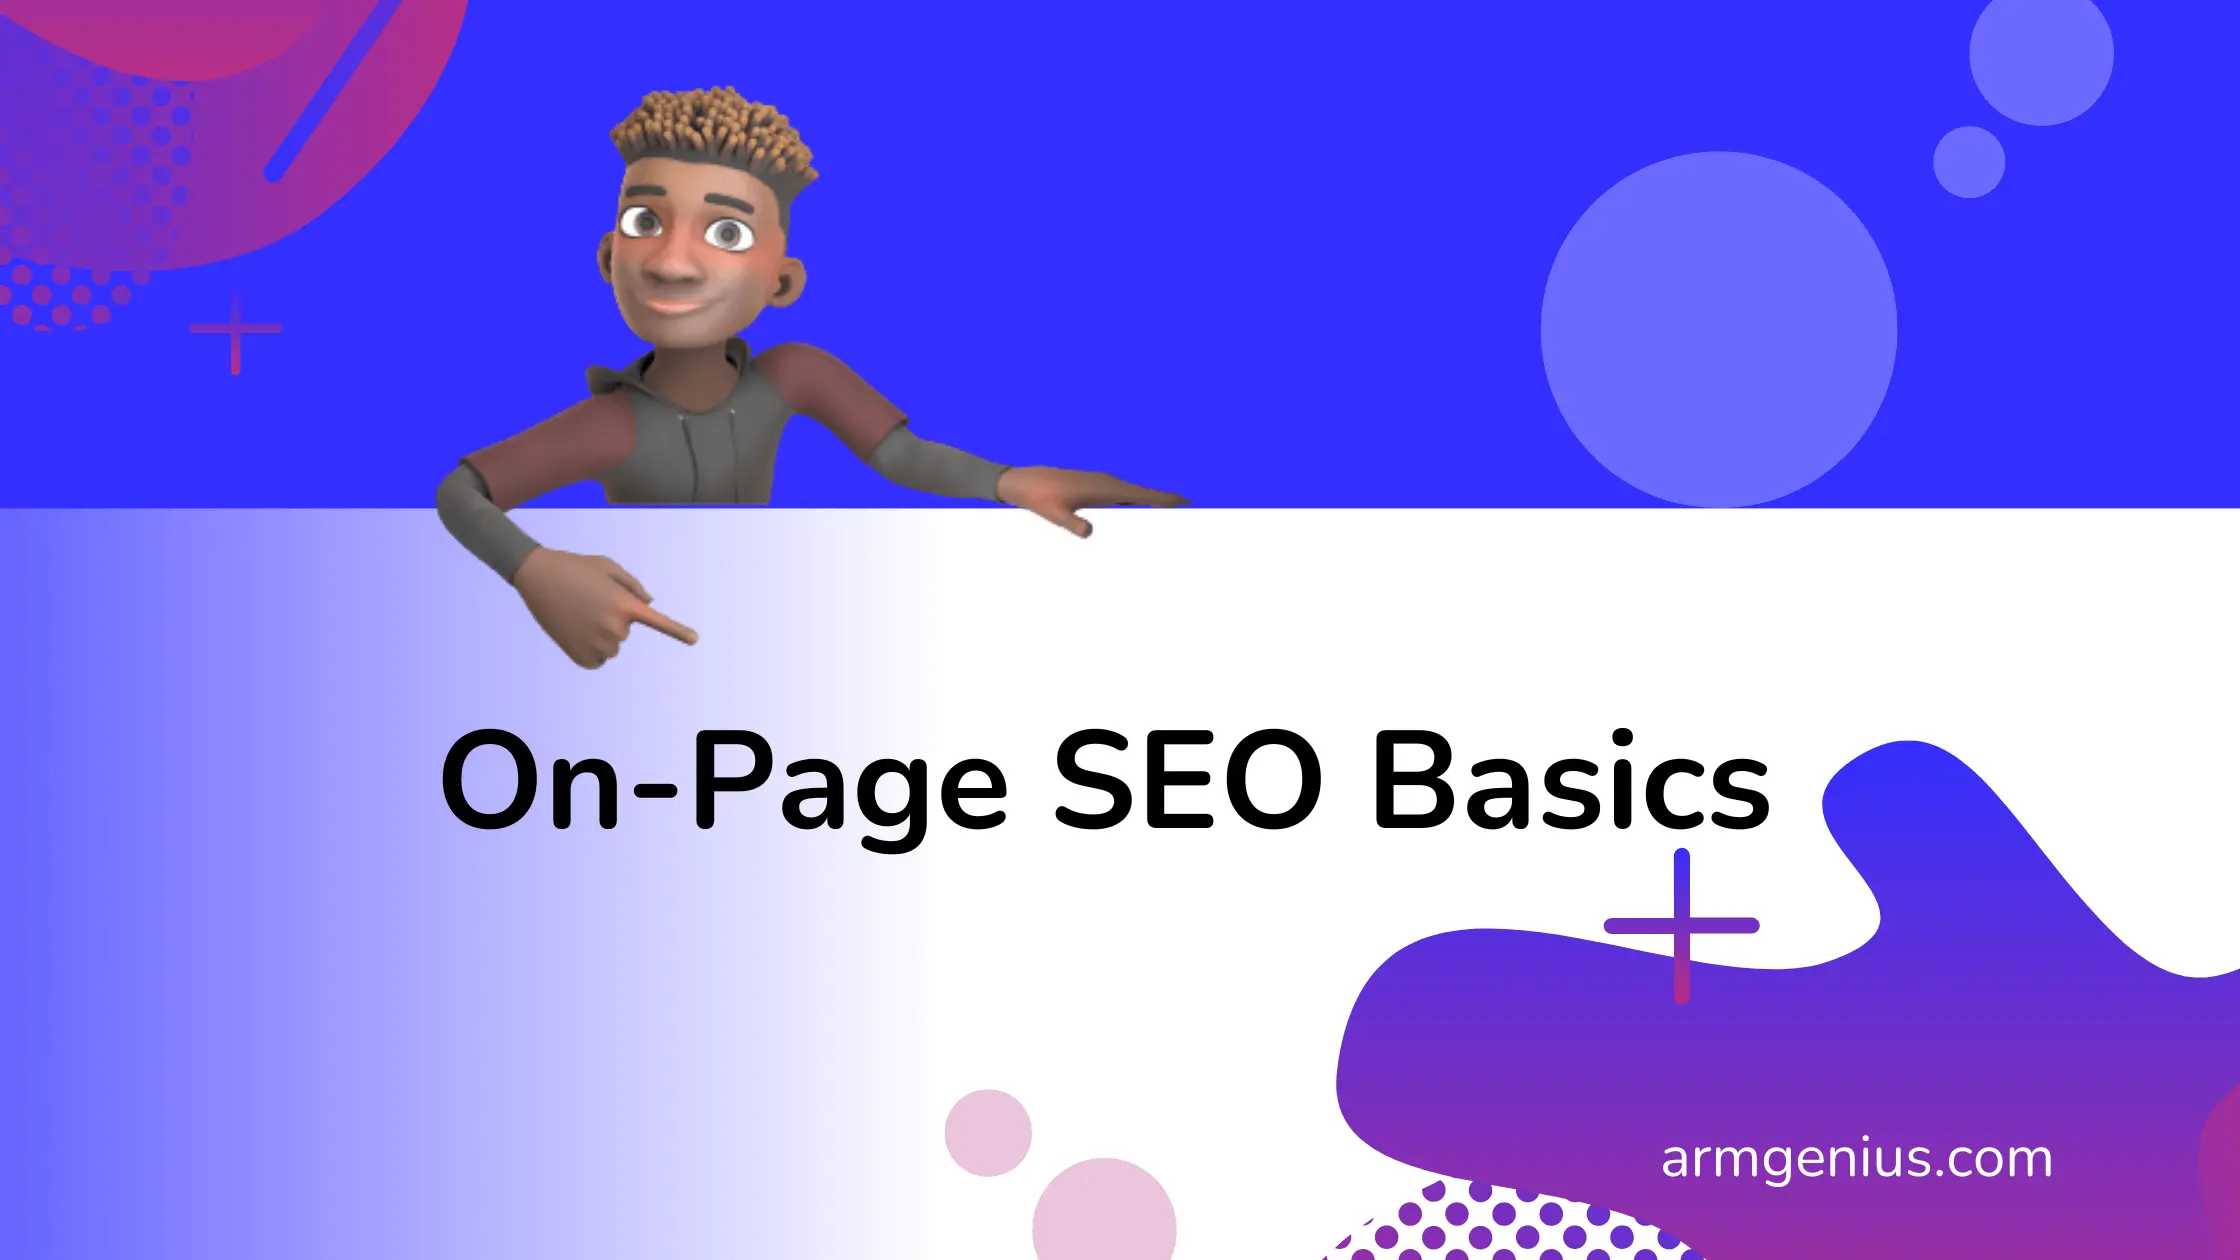 On-Page SEO Basics - Your Website's Strong Foundation